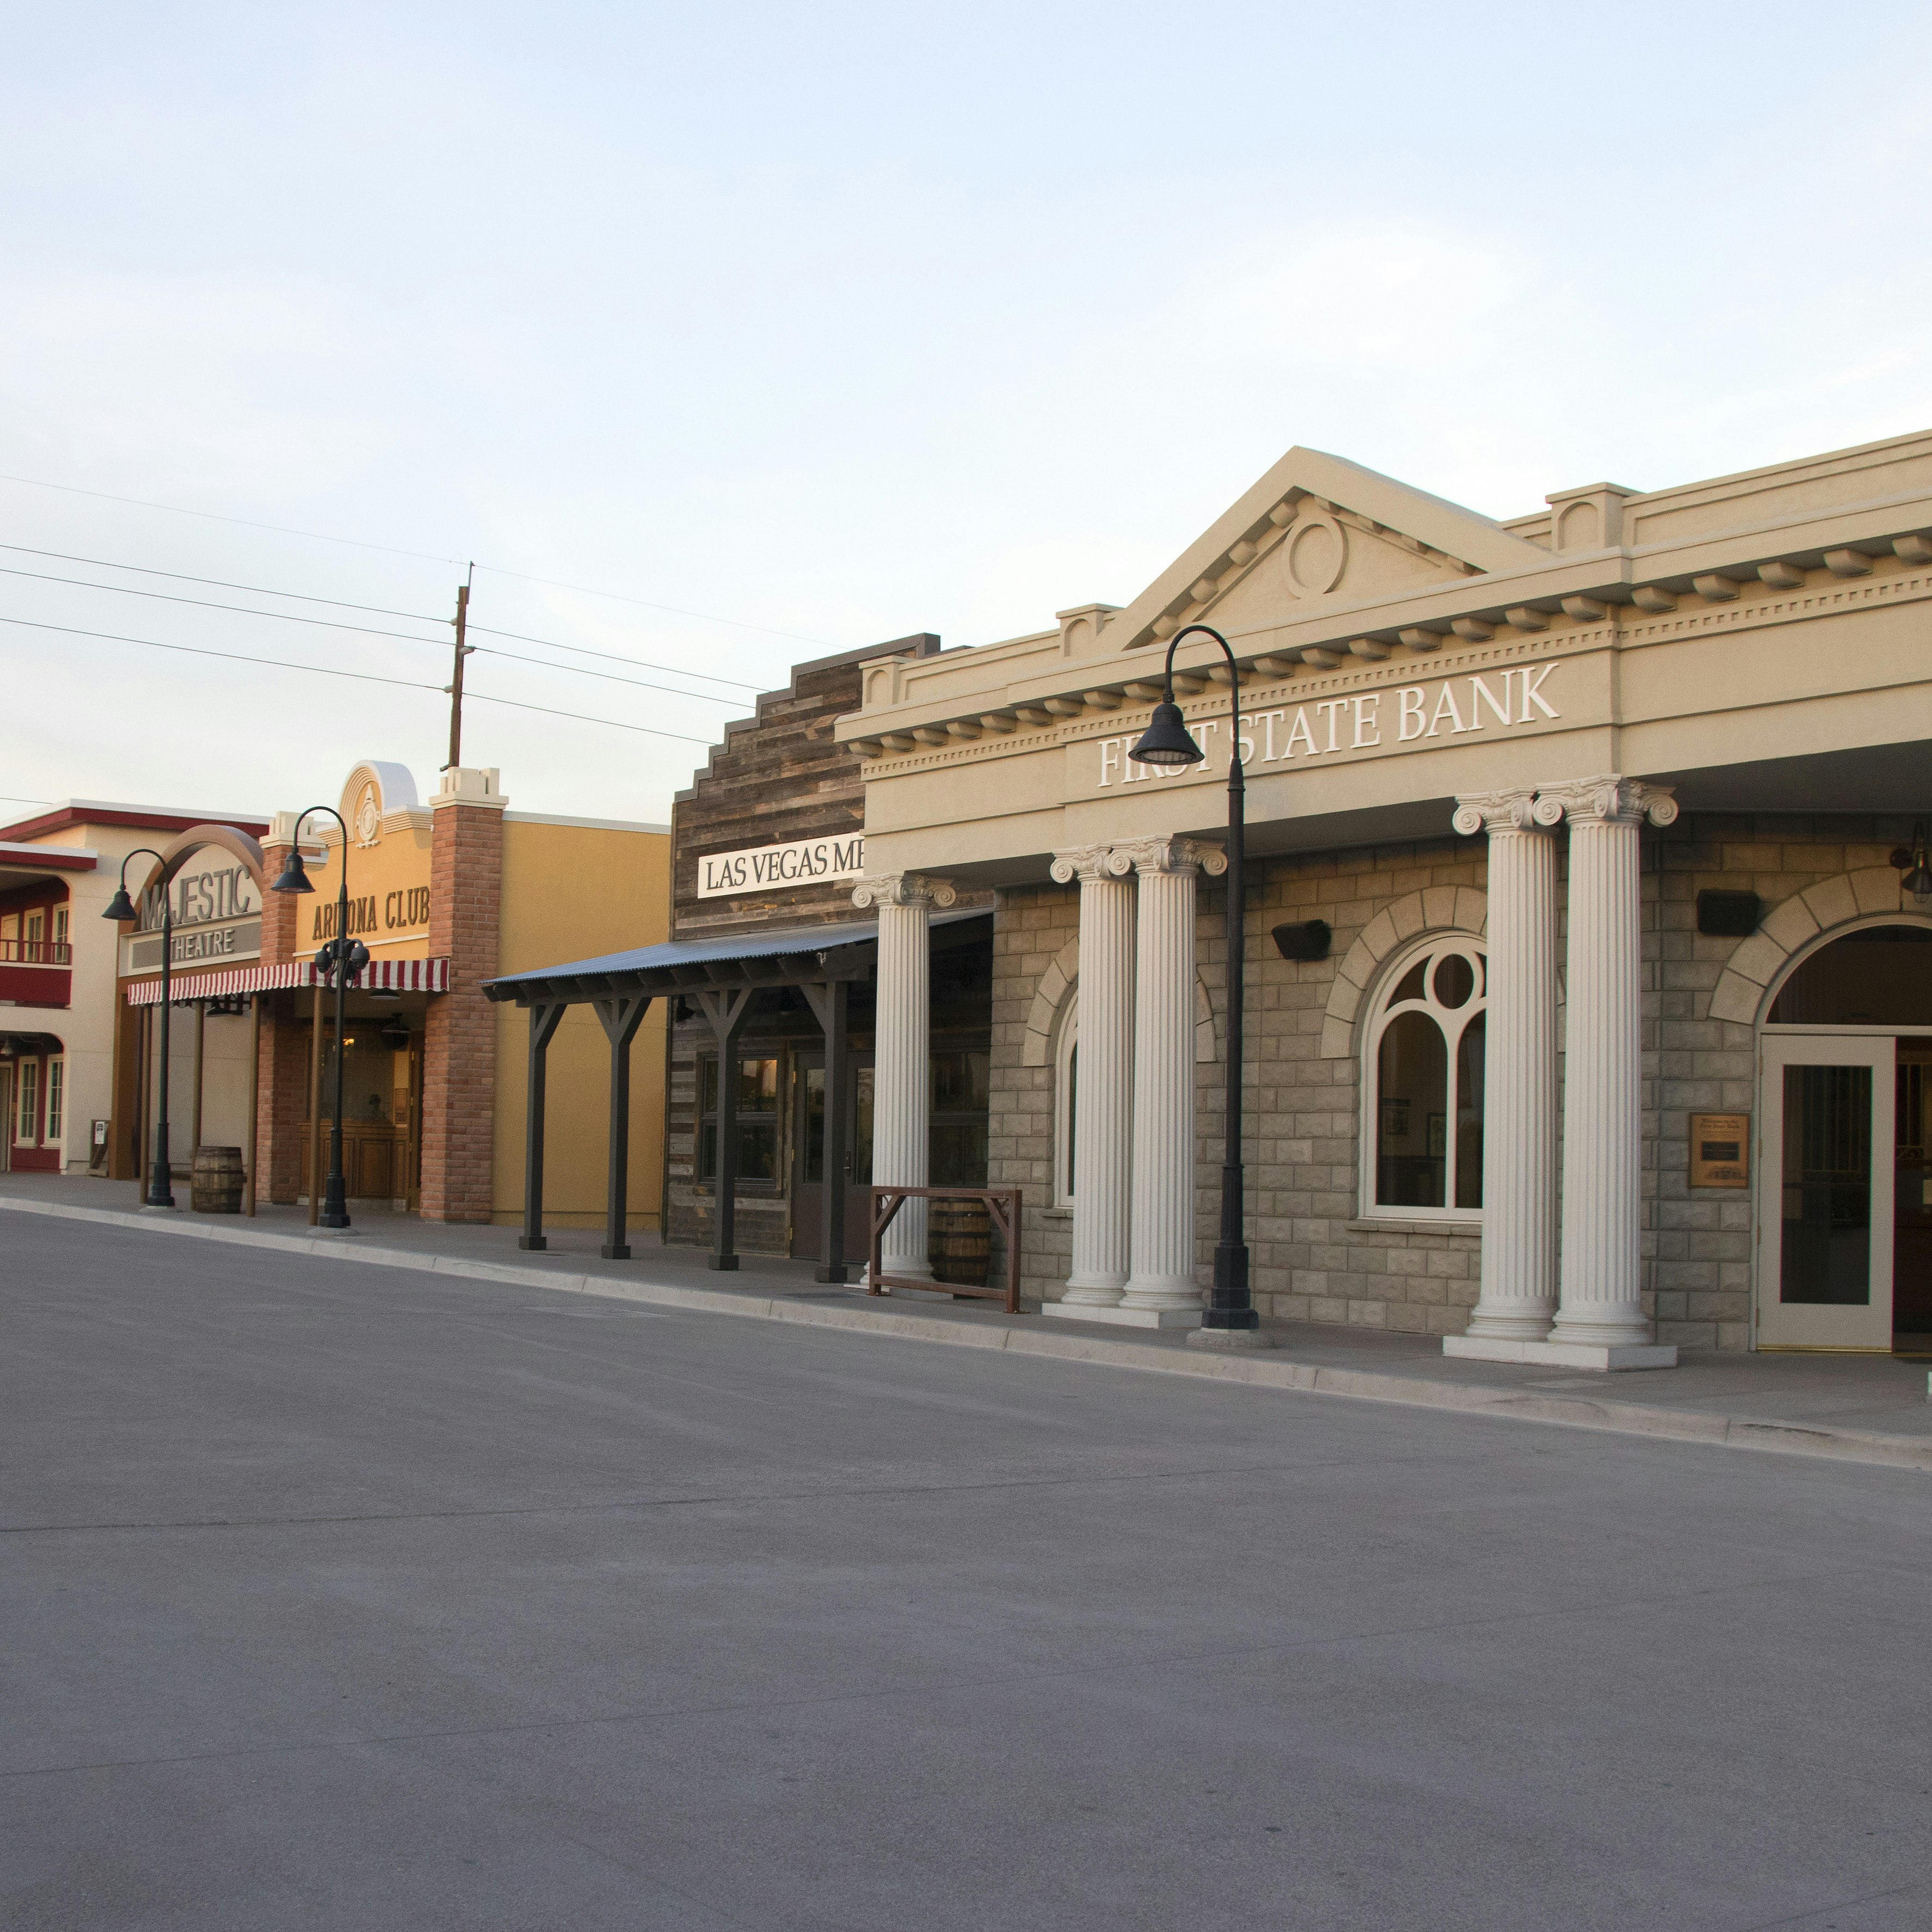 Boomtown 1905 at Springs Preserve features historical recreations of early Las Vegas buildings.